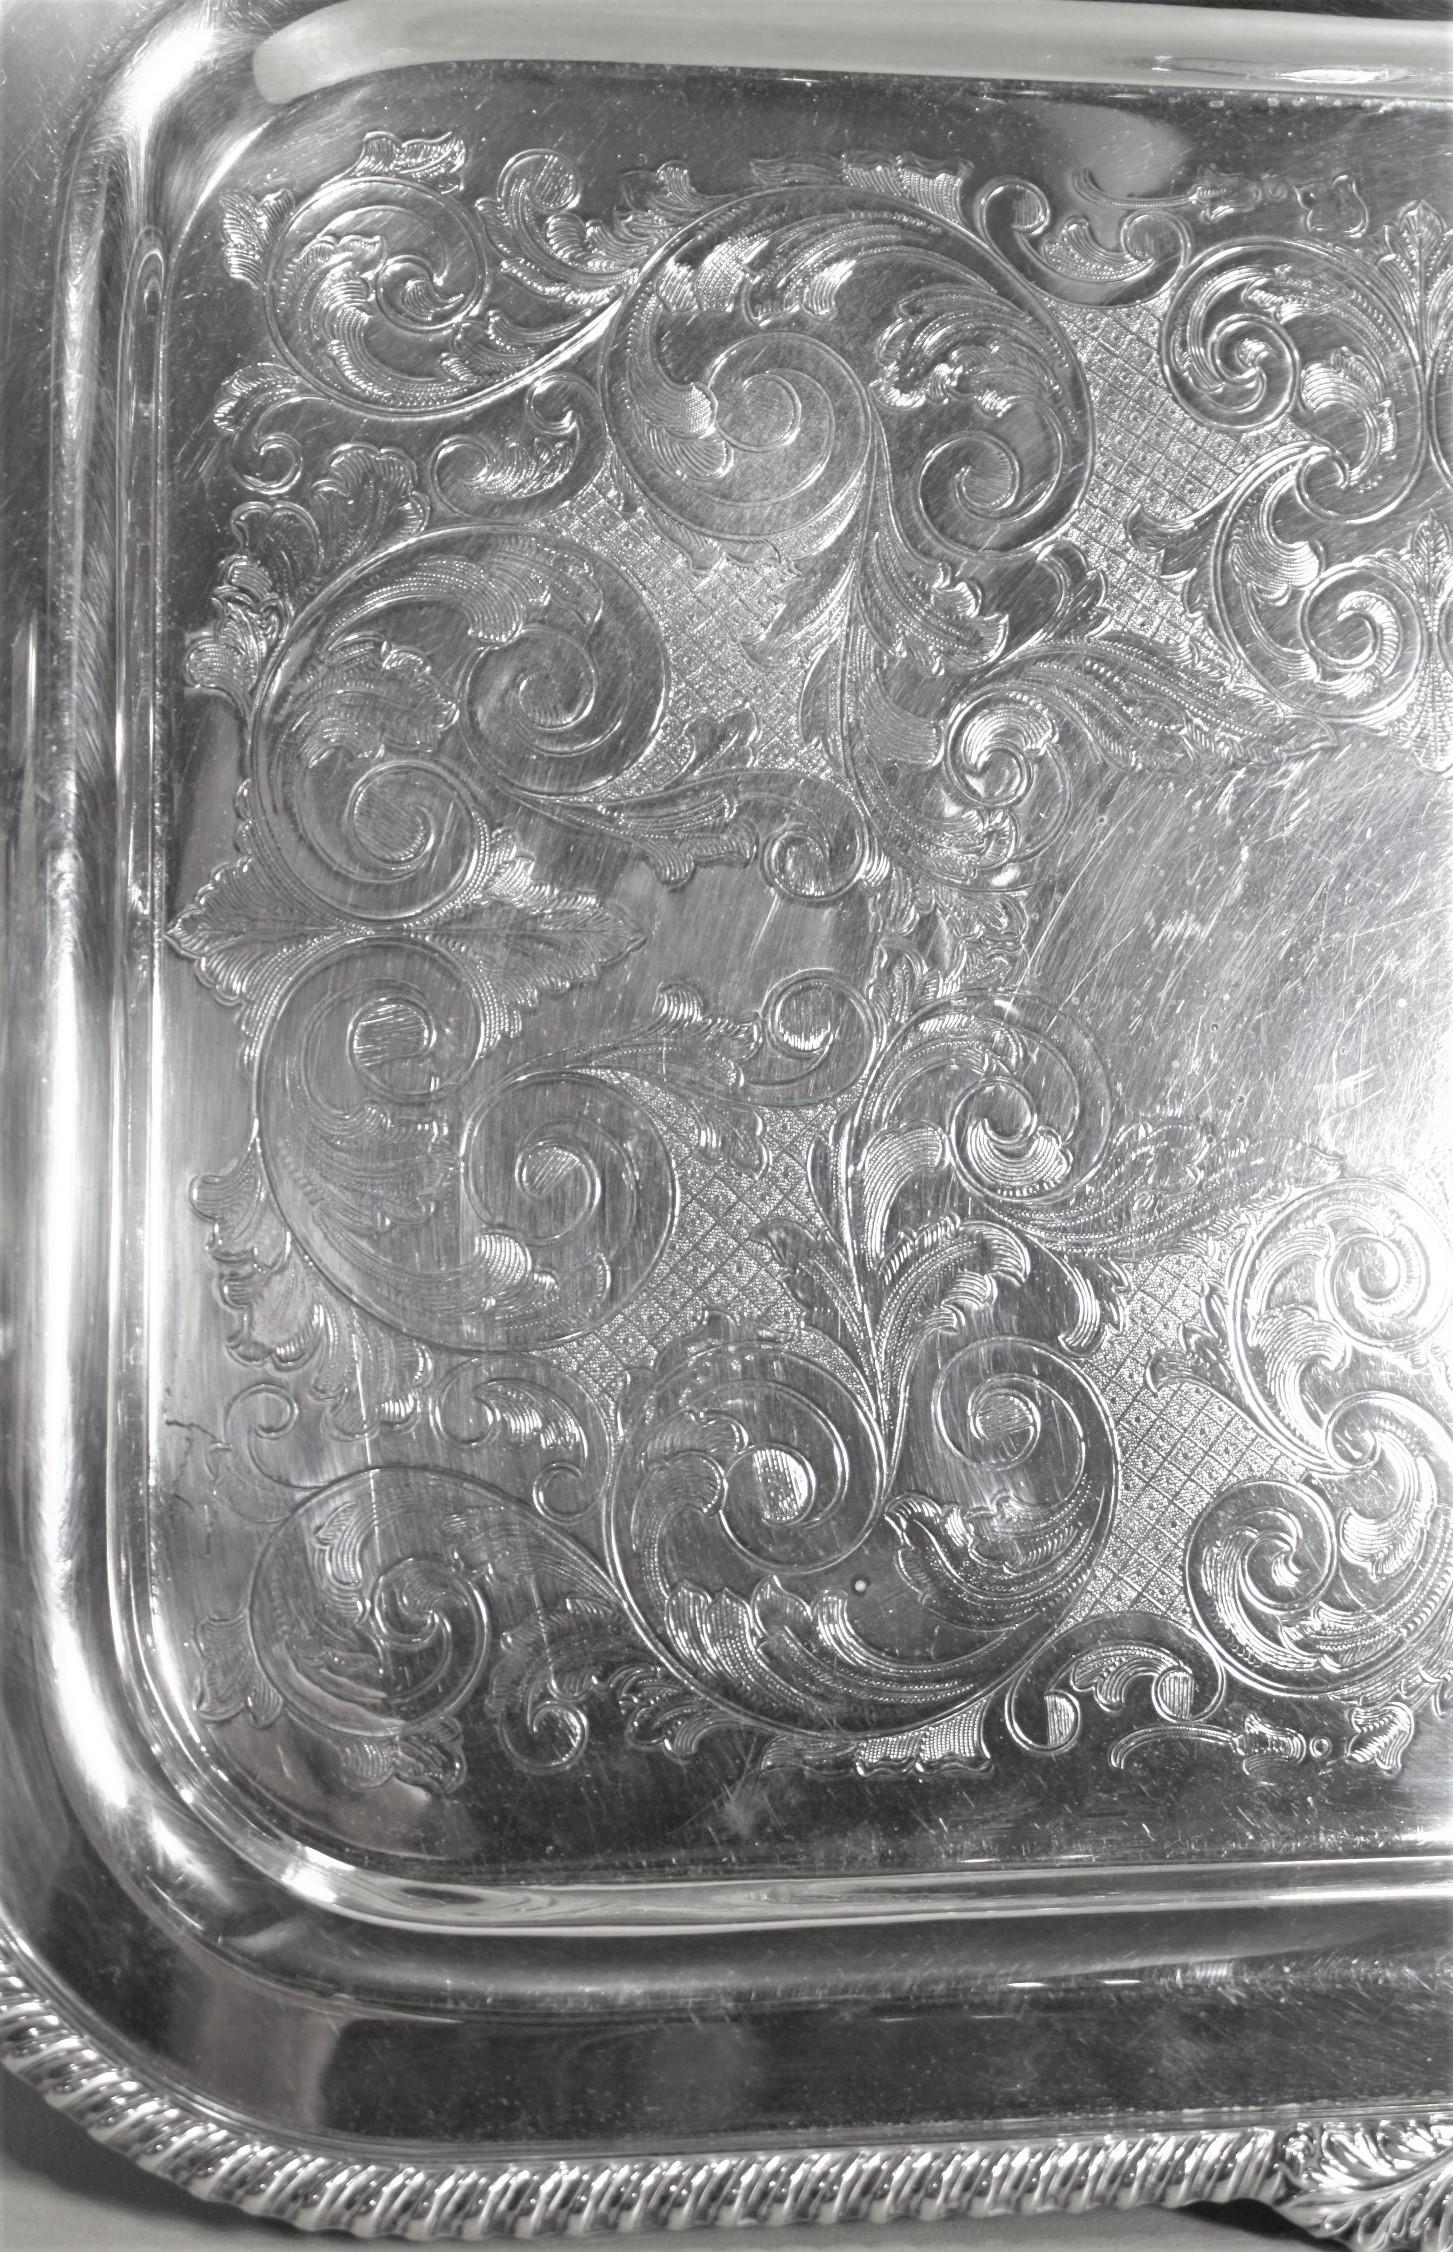 Antique Styled Silver Plated Serving Tray with Ornate Engraving & Handles 4